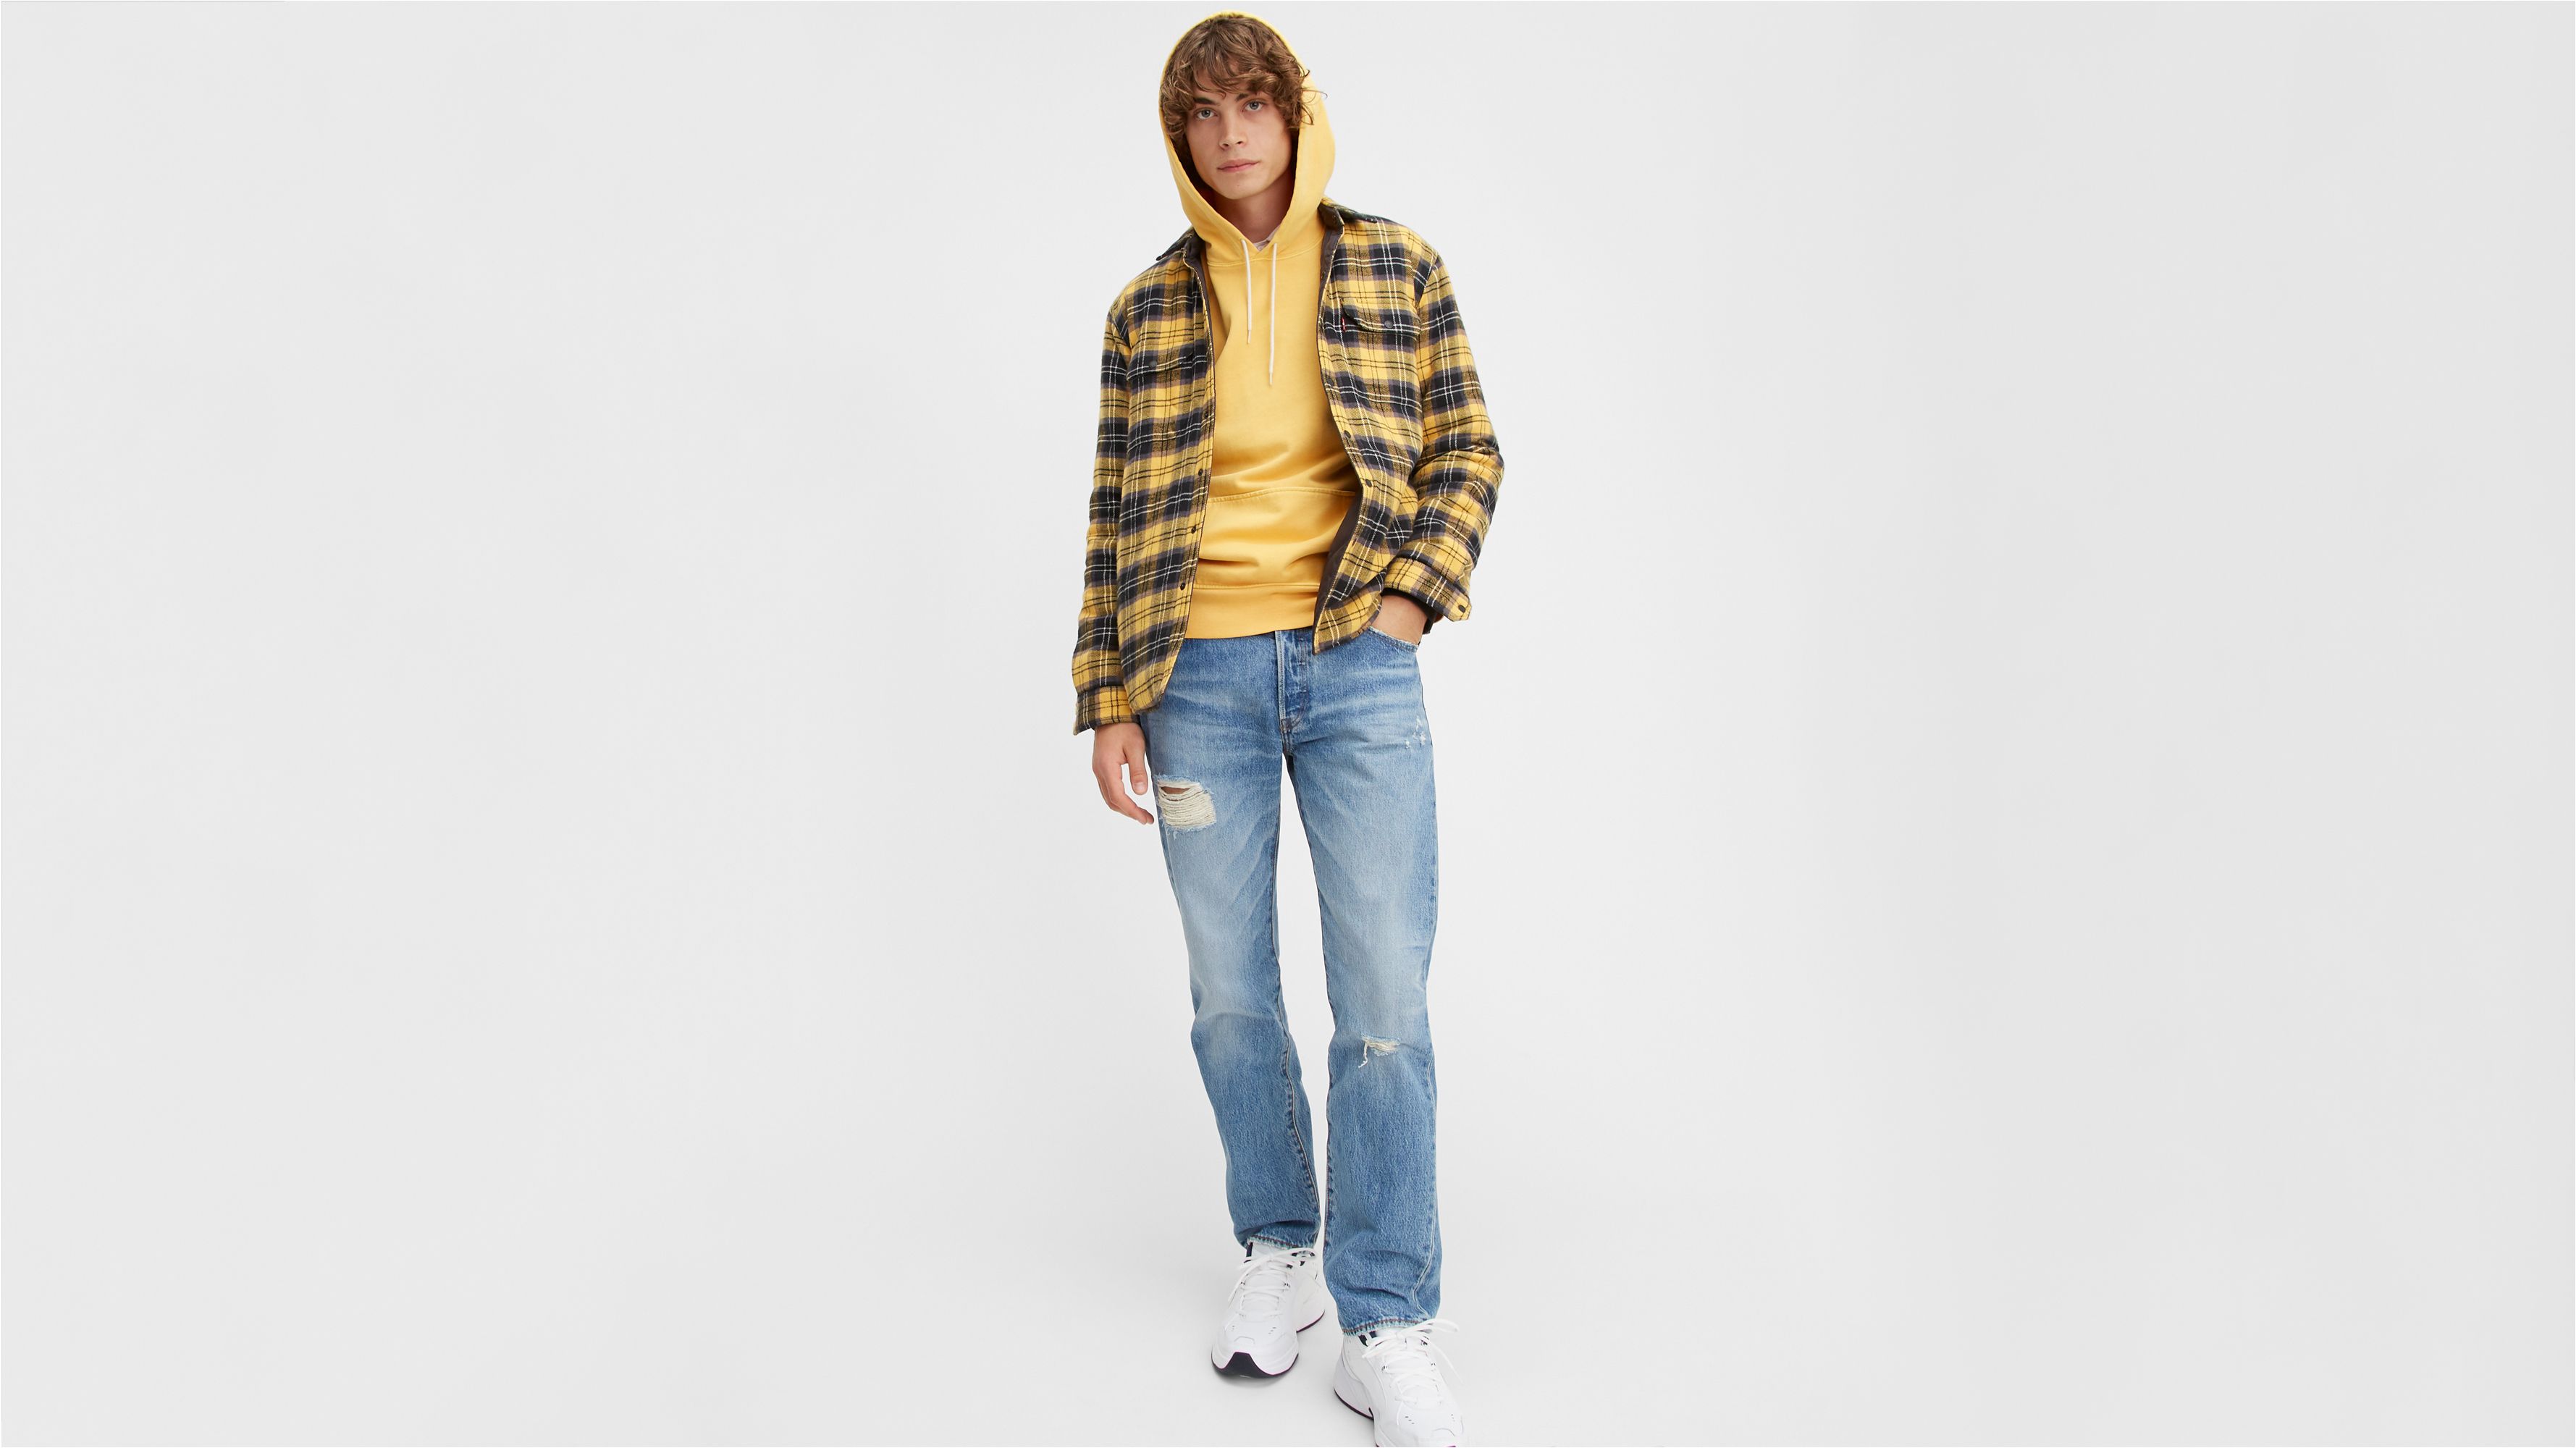 yellow ripped jeans mens